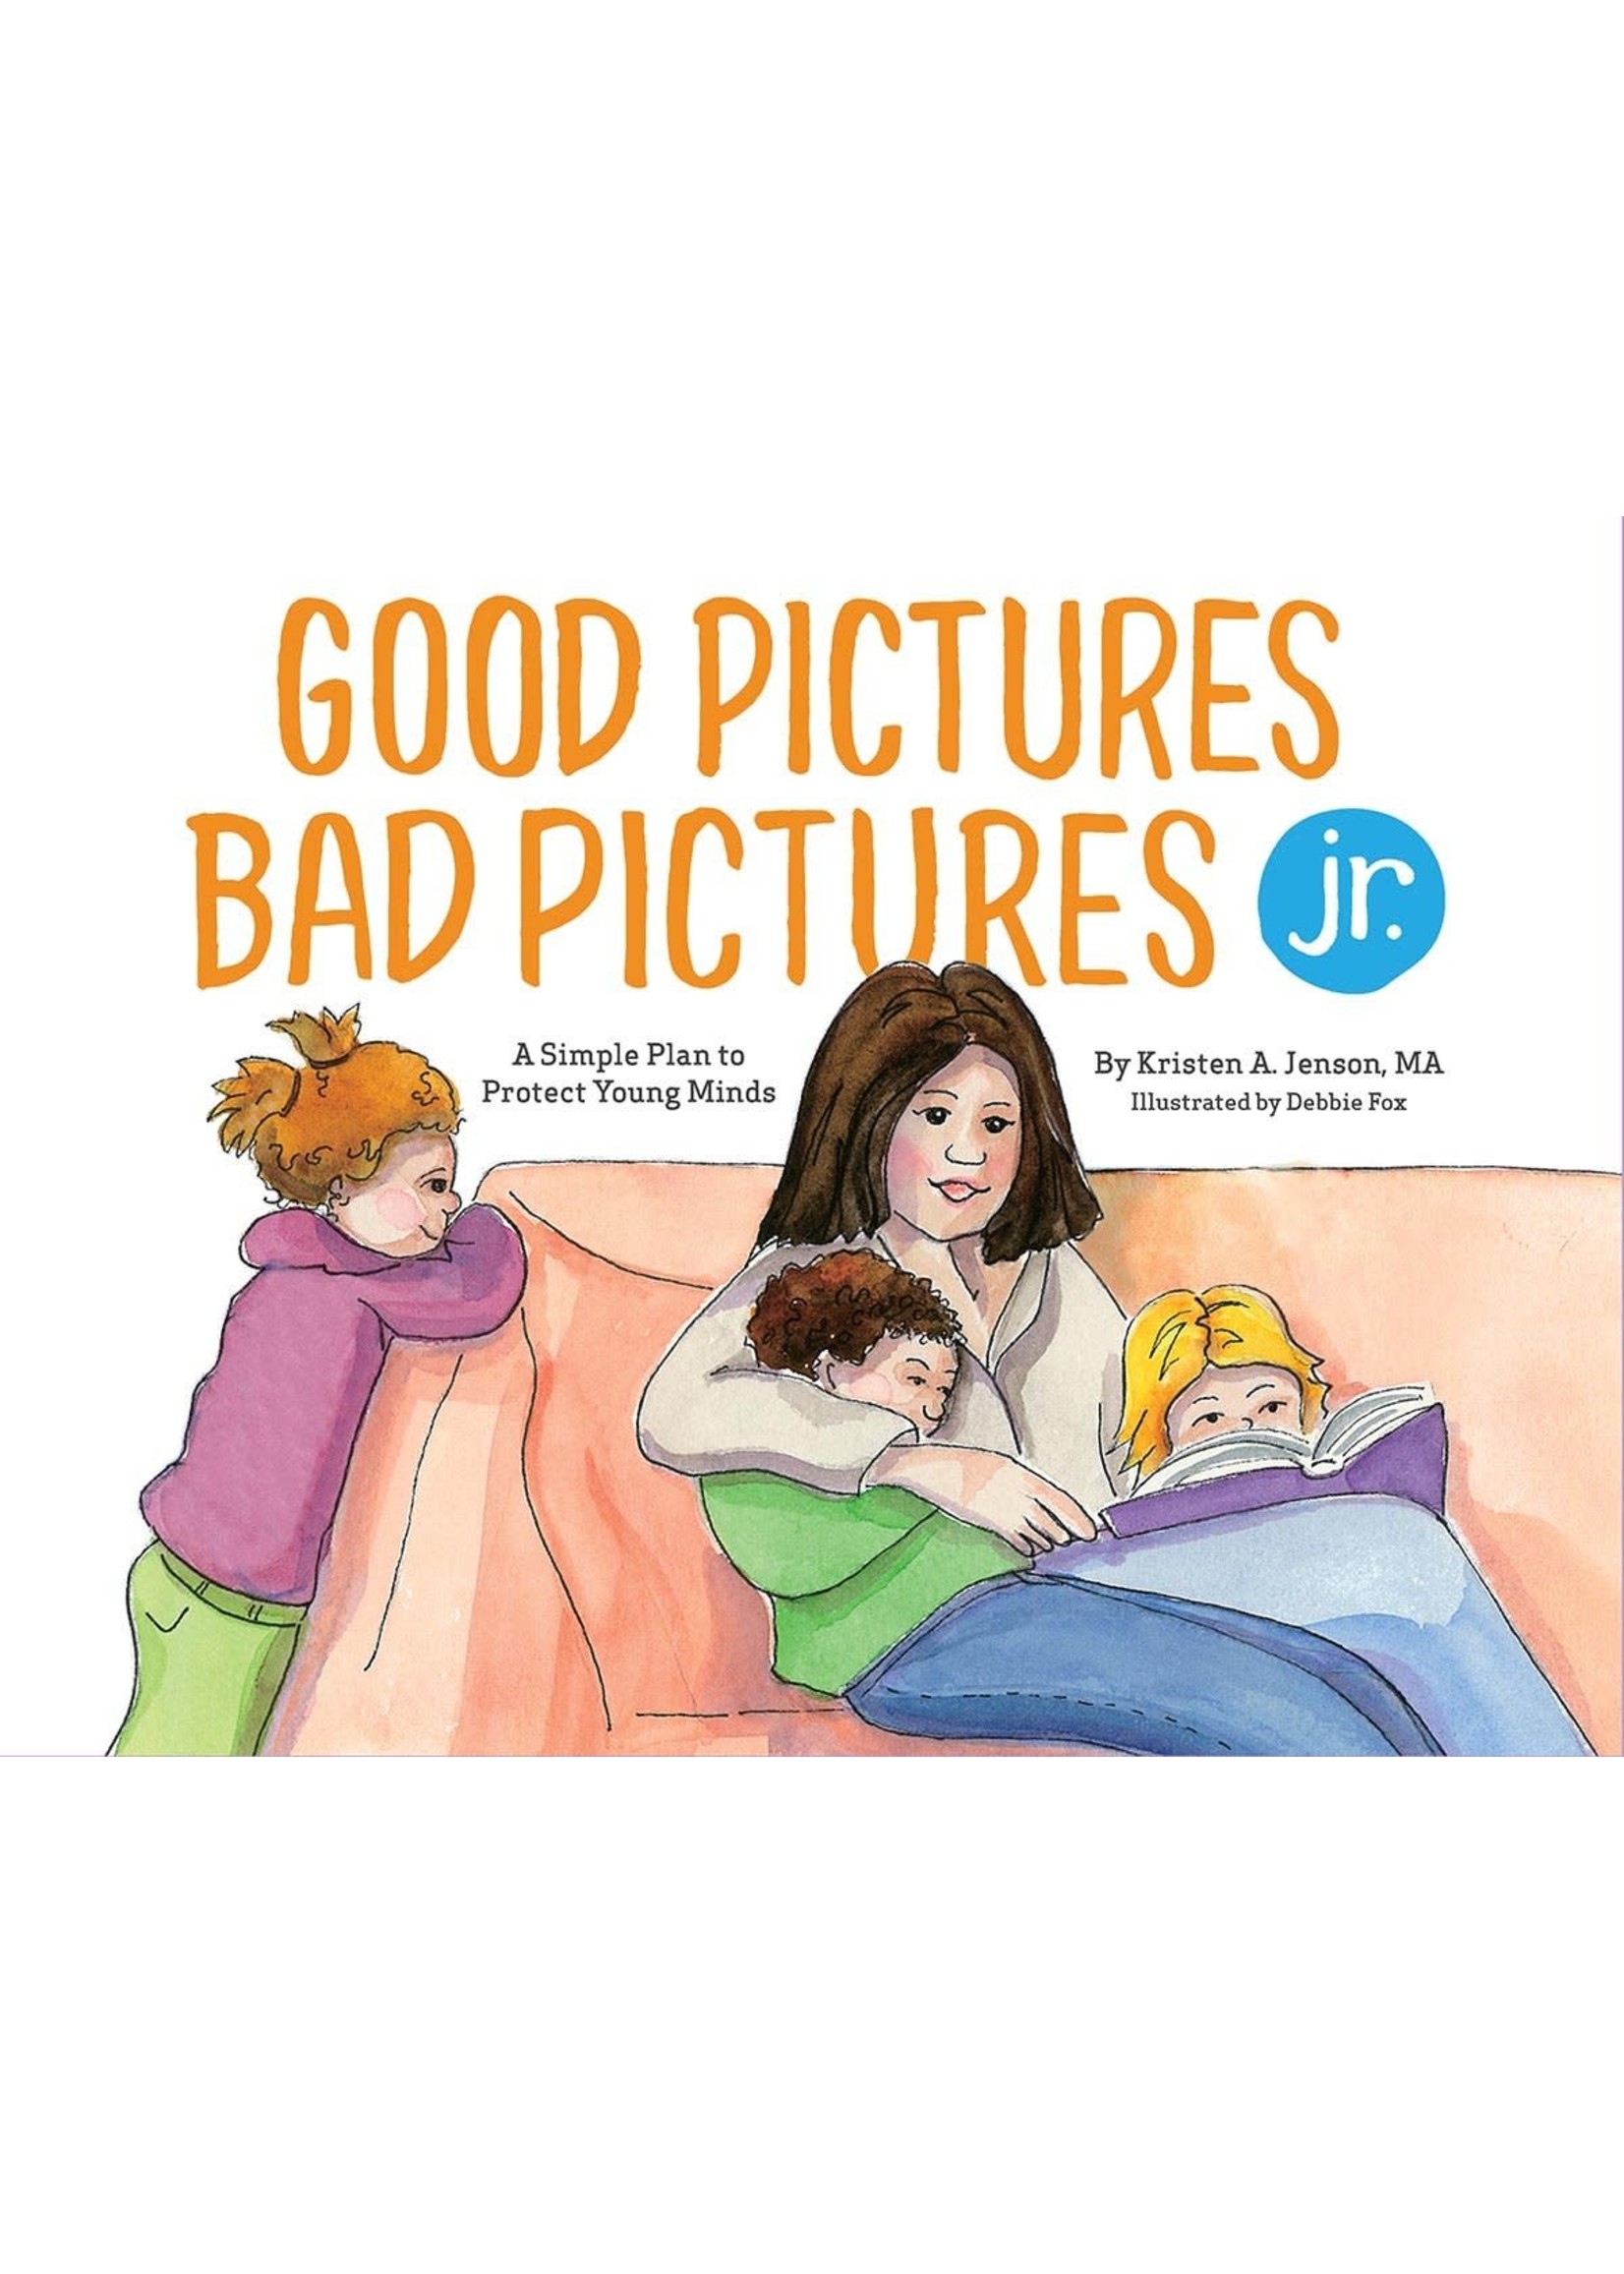 Good Pictures Bad Pictures: A Simple Plan to Protect Young Minds